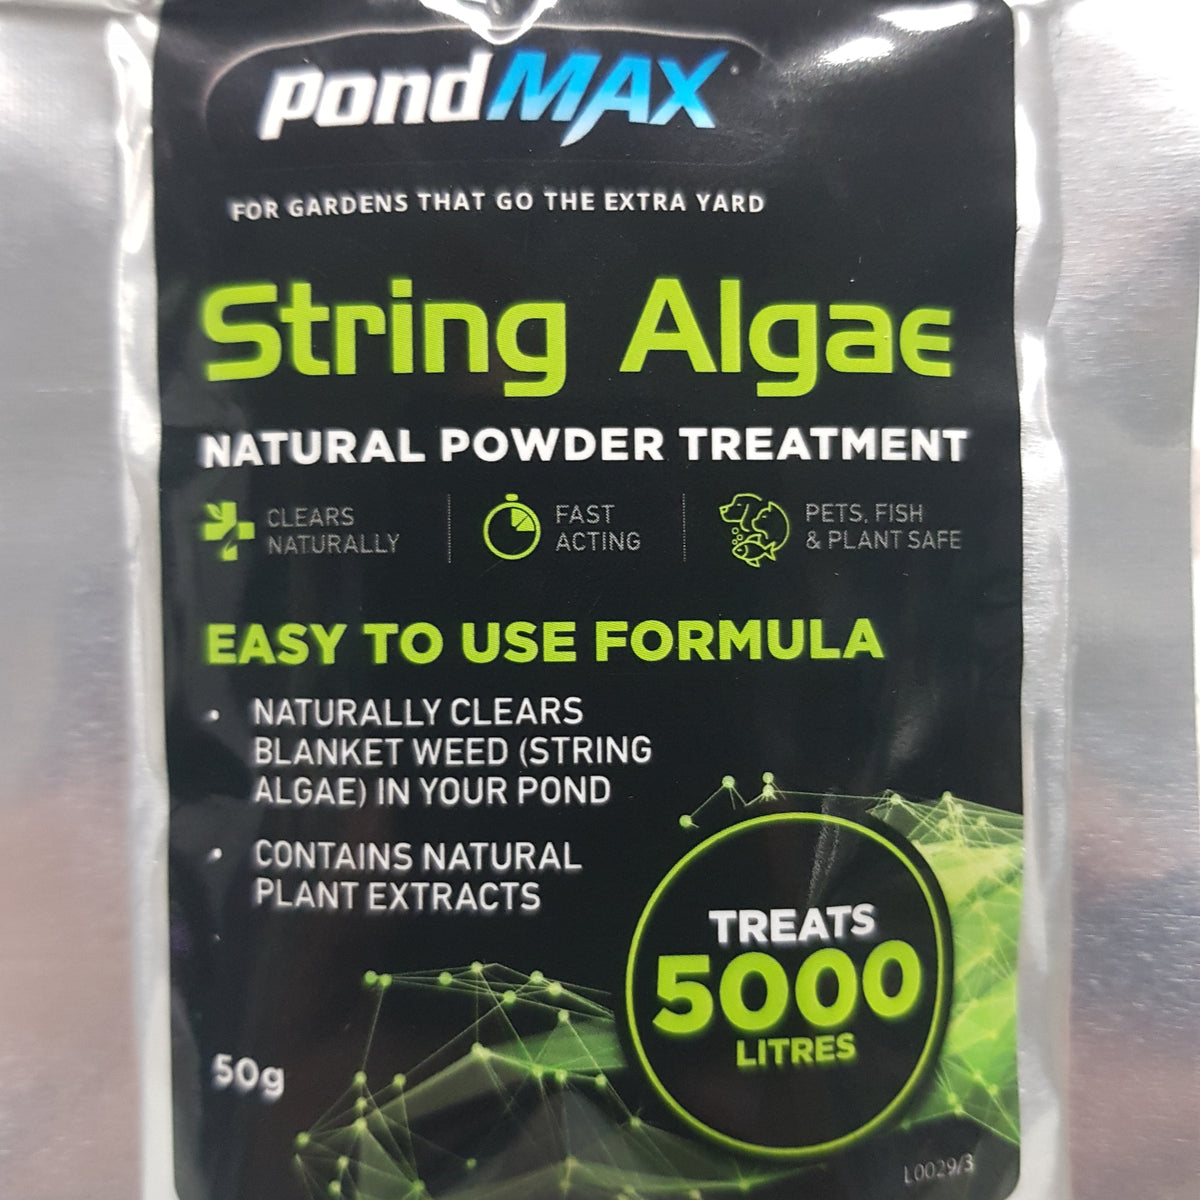 String Algae water treatment for ponds